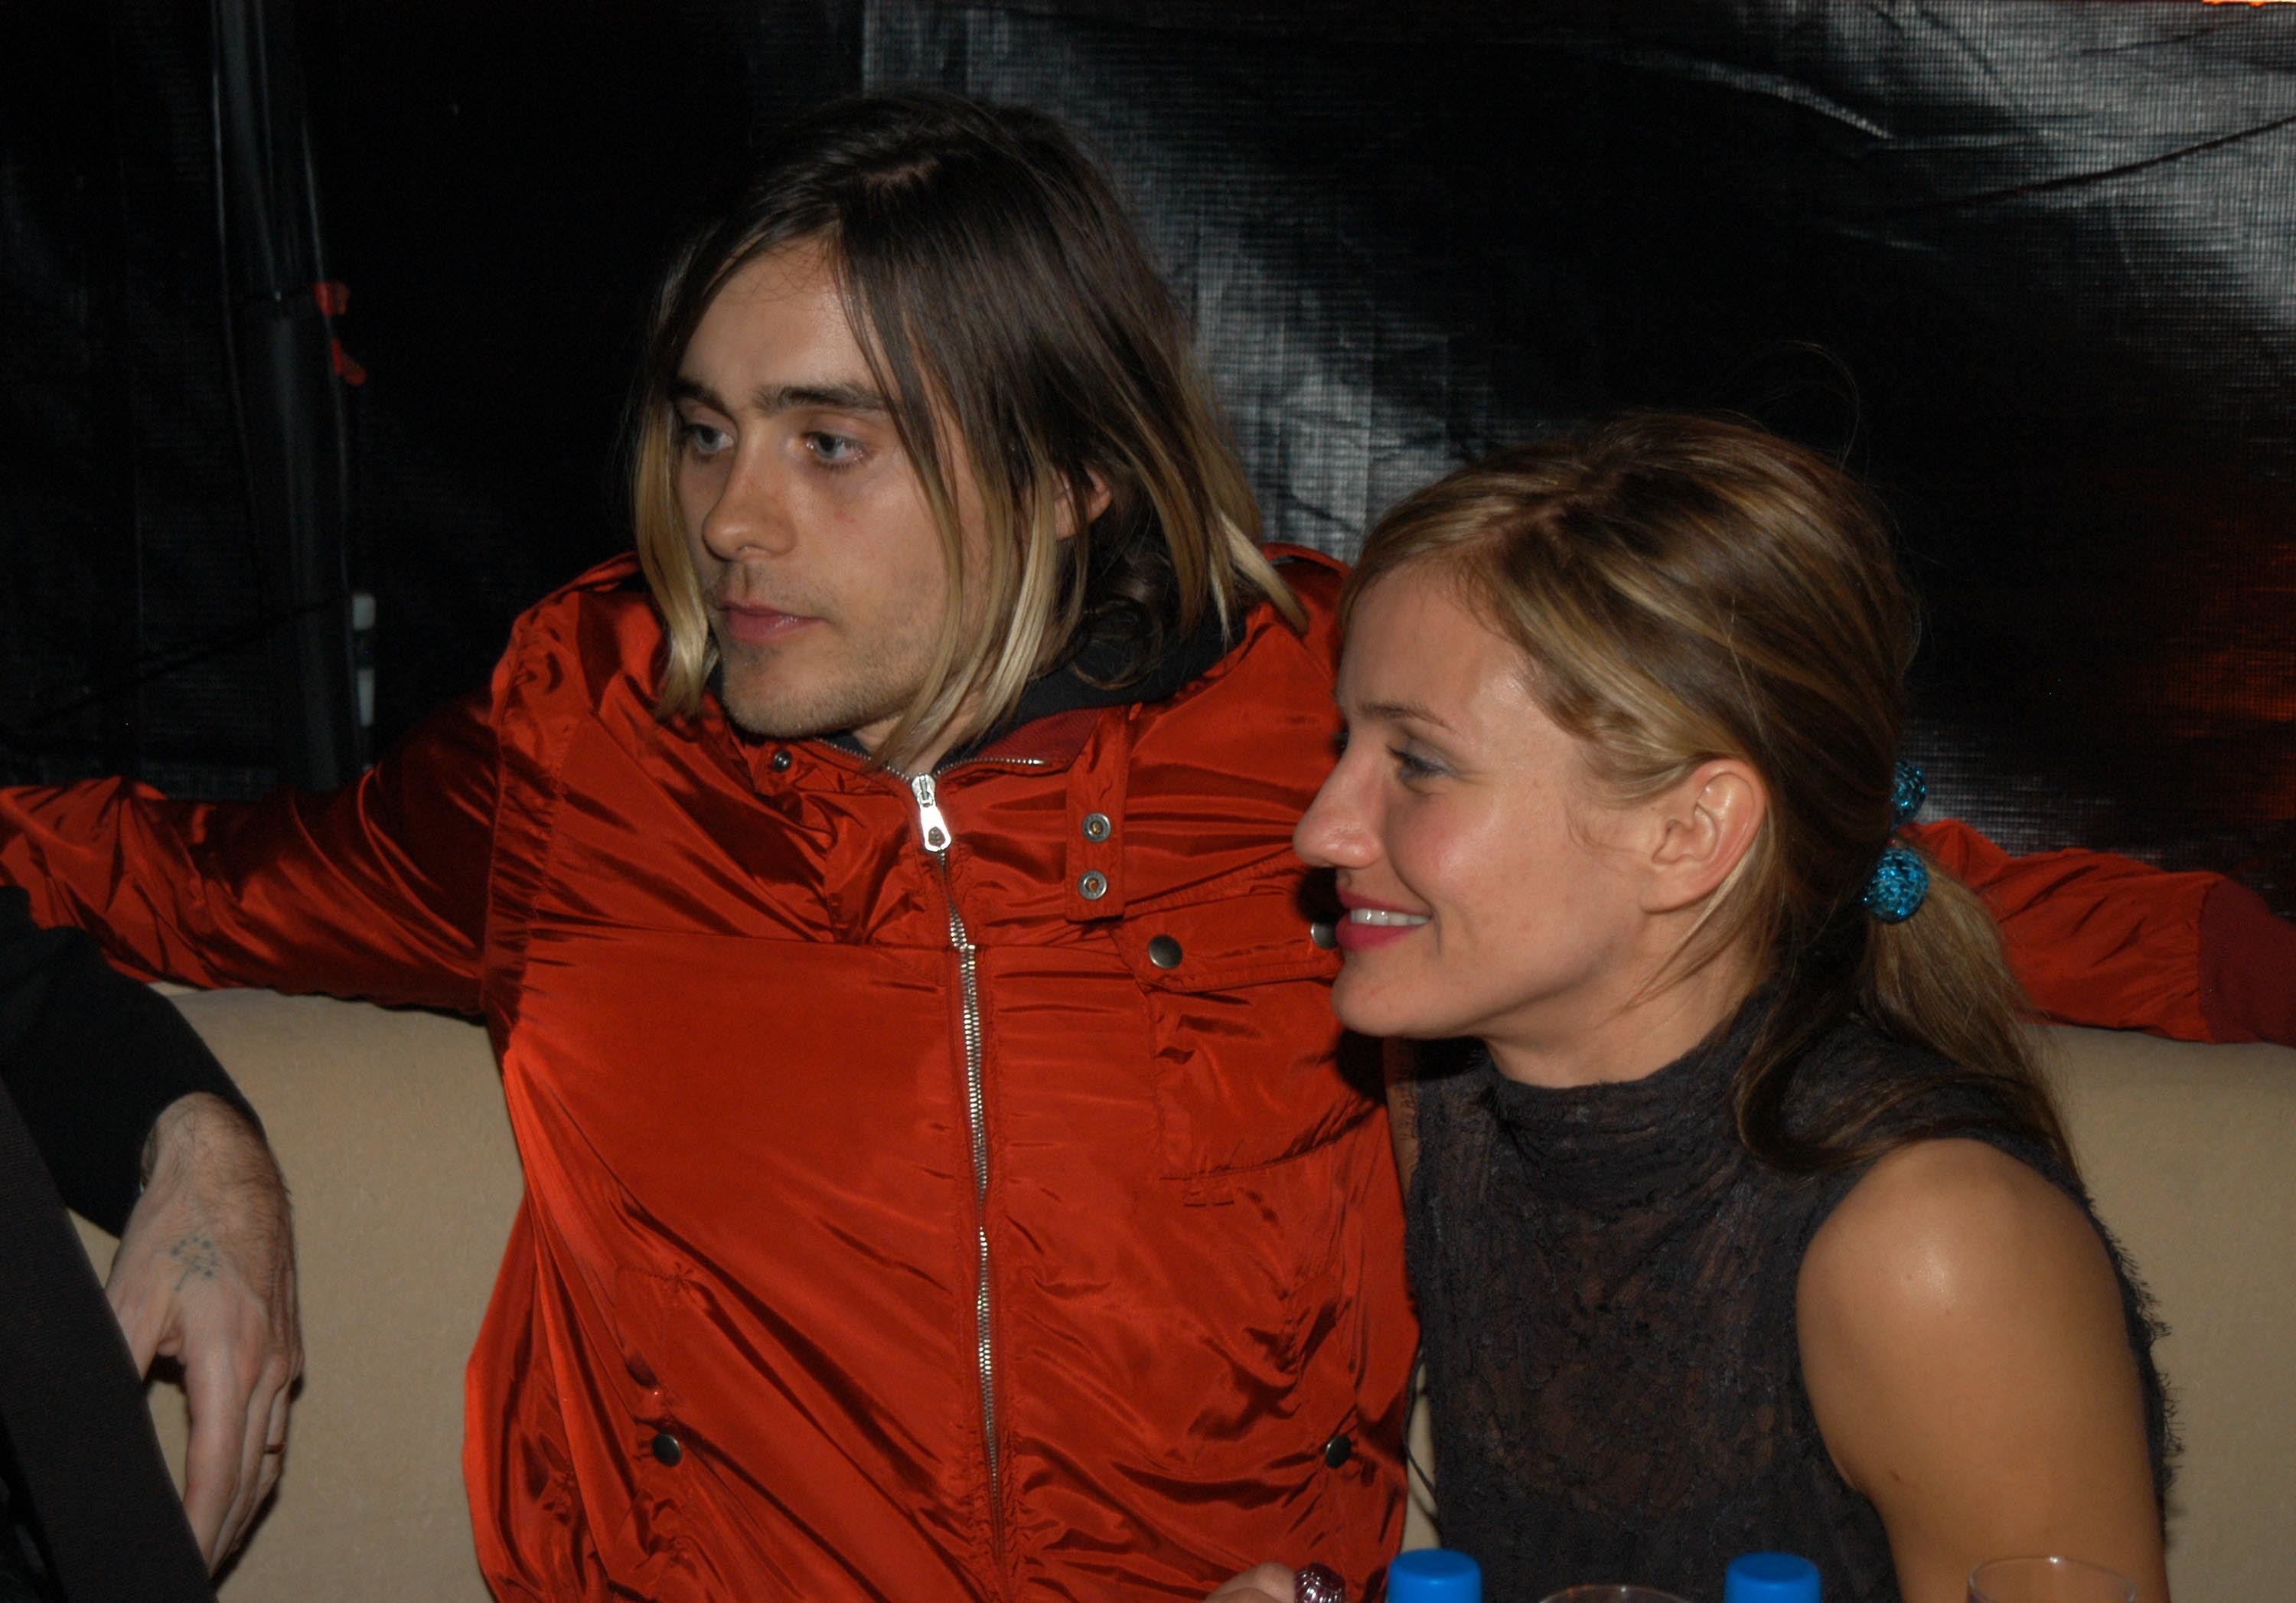 Jared Leto and Cameron Diaz are pictured sitting together